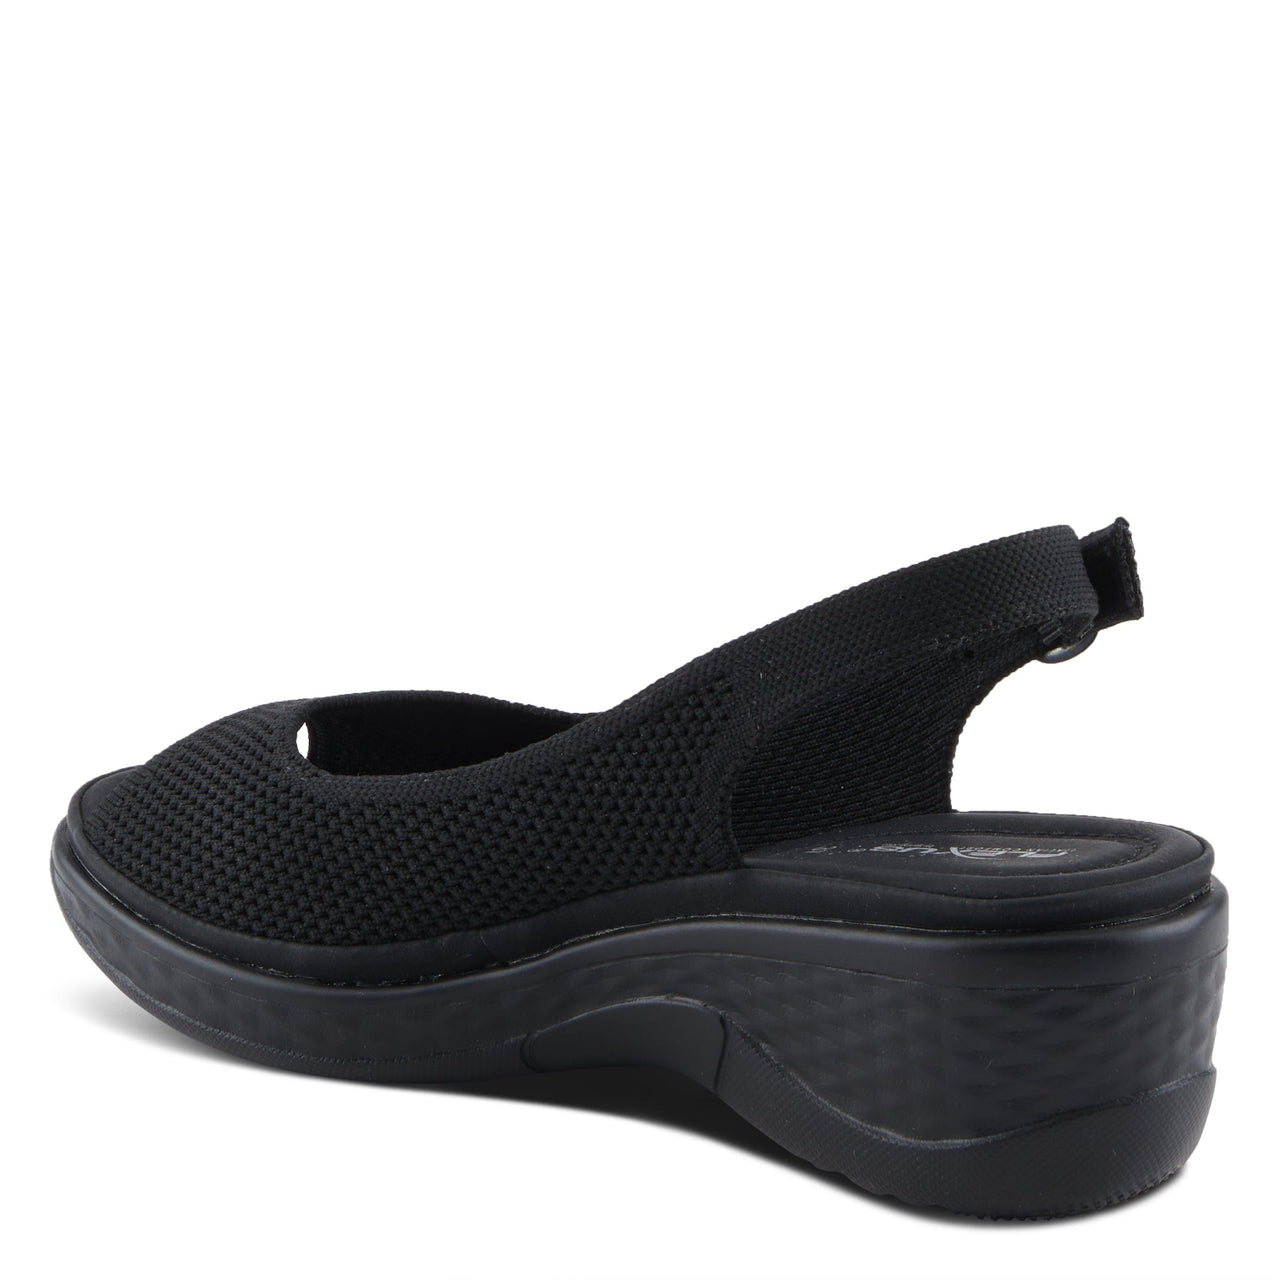 Women's Spring Step Shoes Flexus Mayberry Sandals in black leather